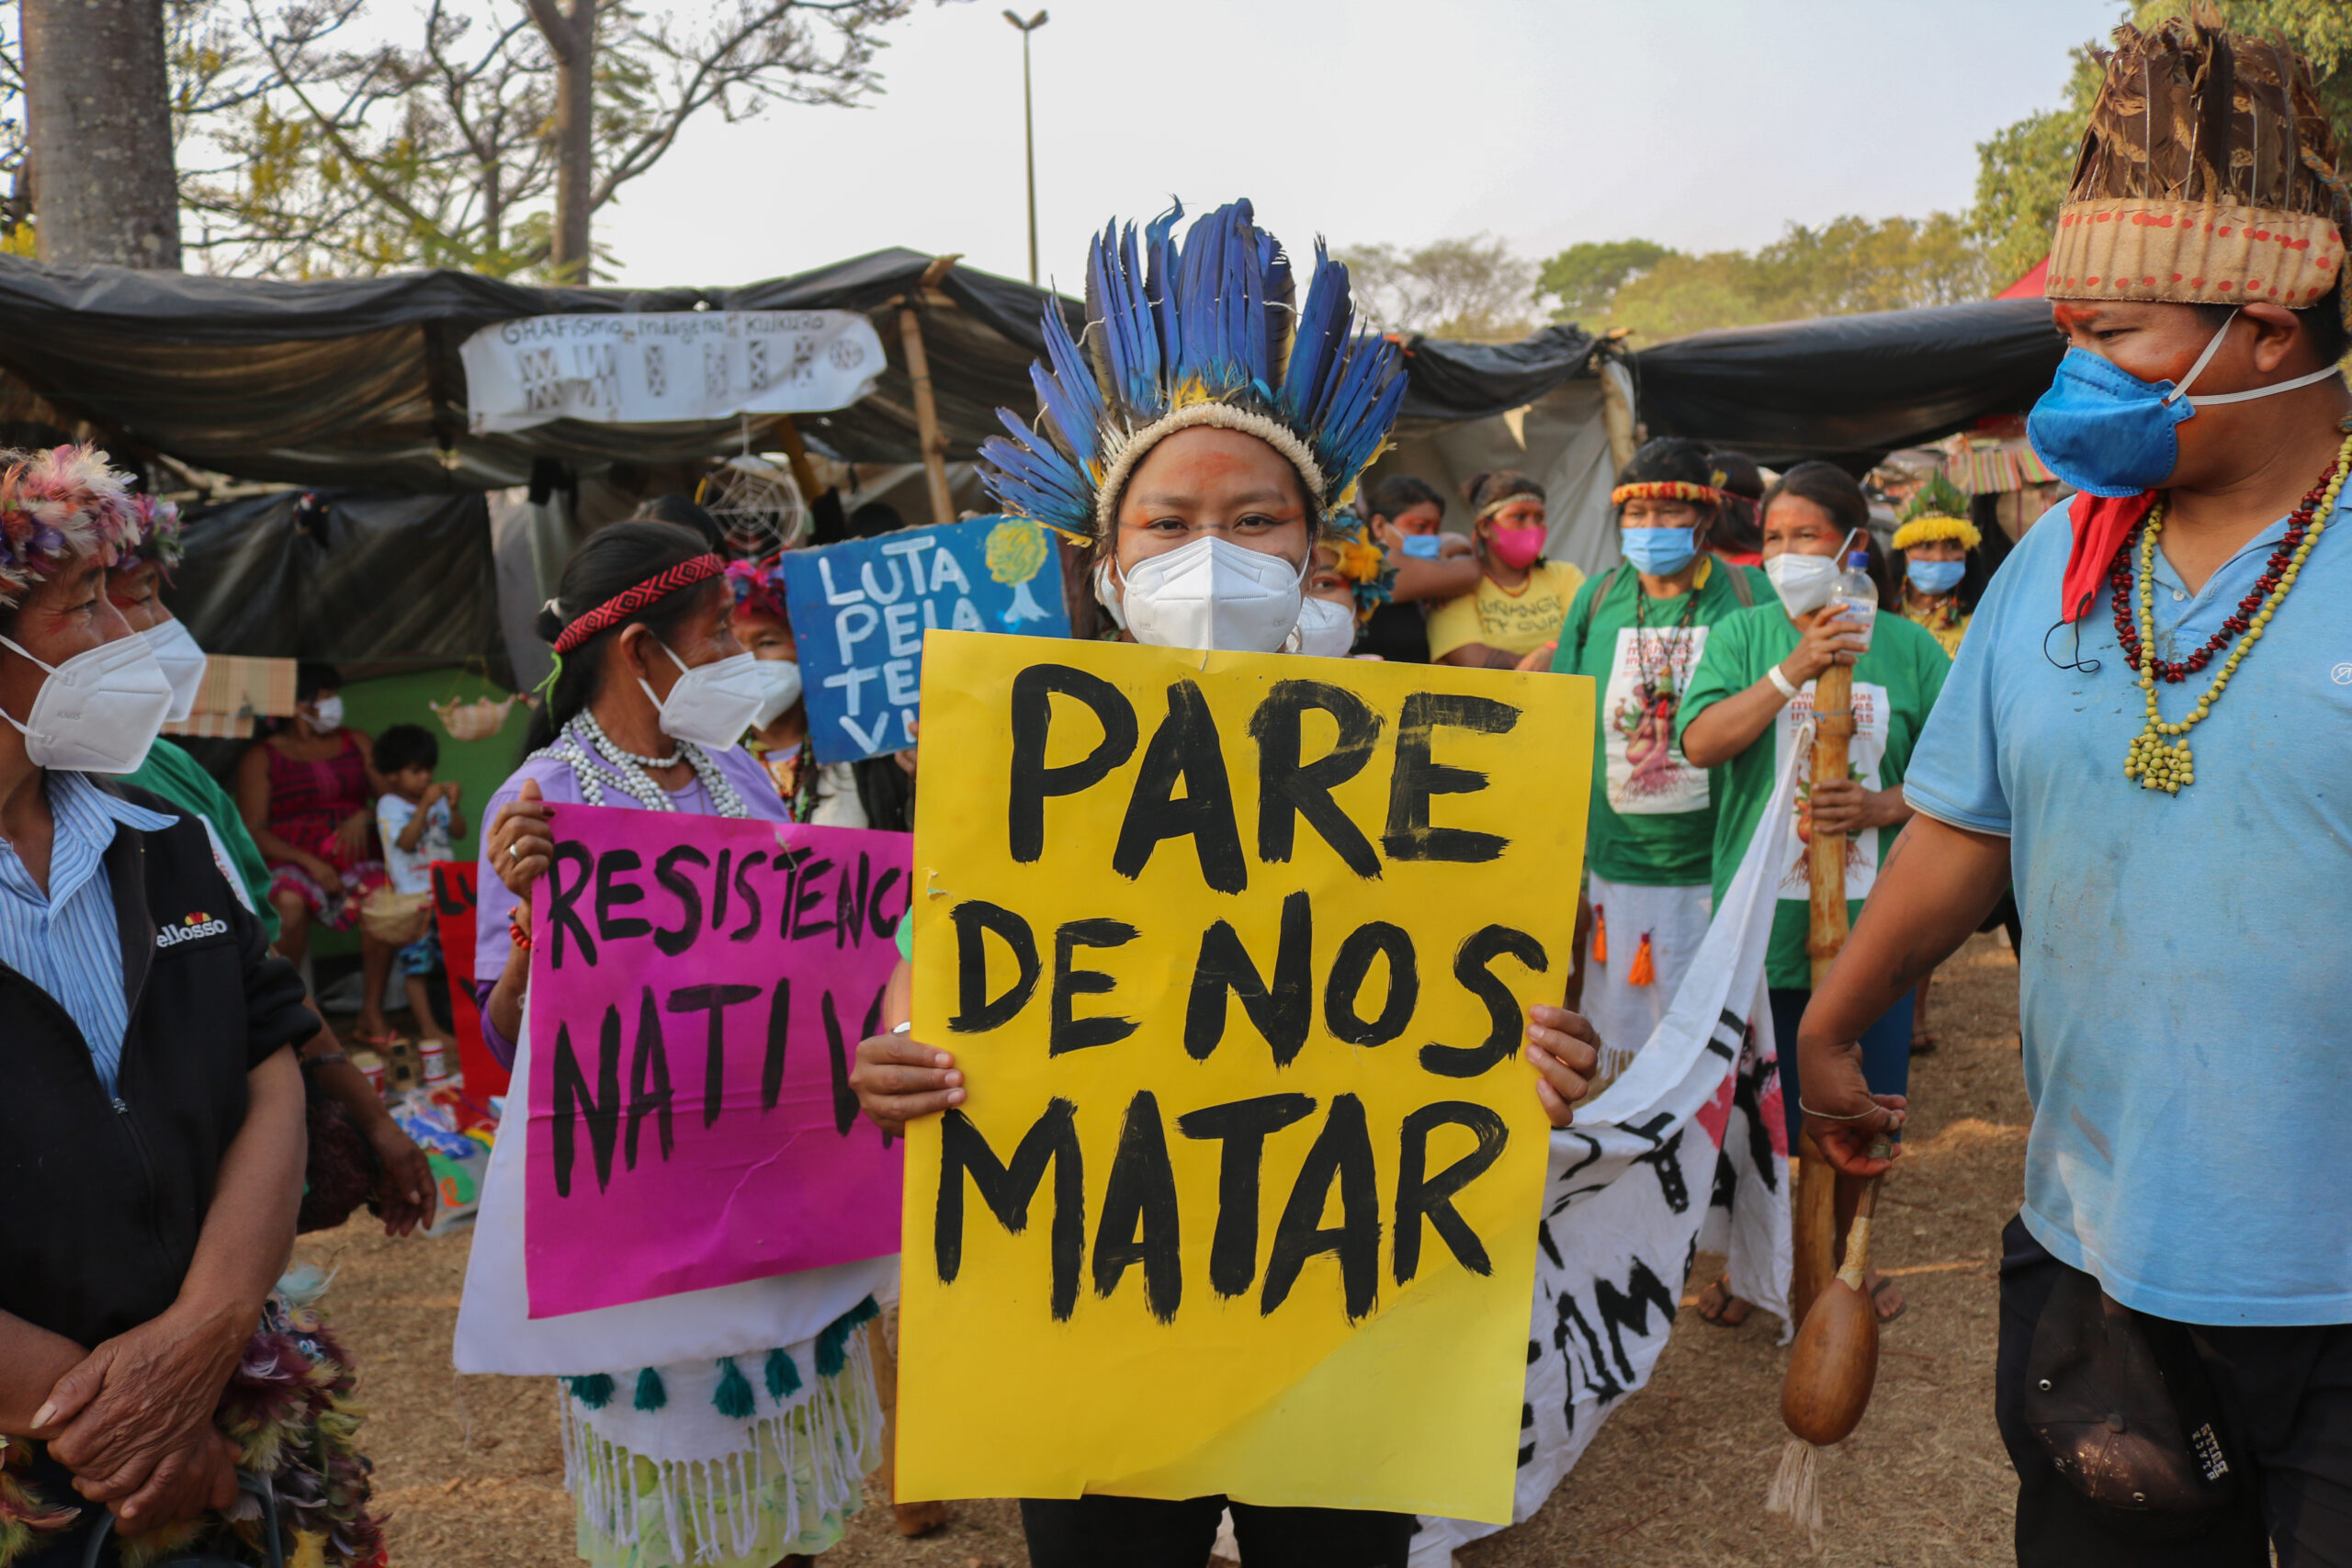 Violence against Brazil’s indigenous communities “deepens” in 2021: New report